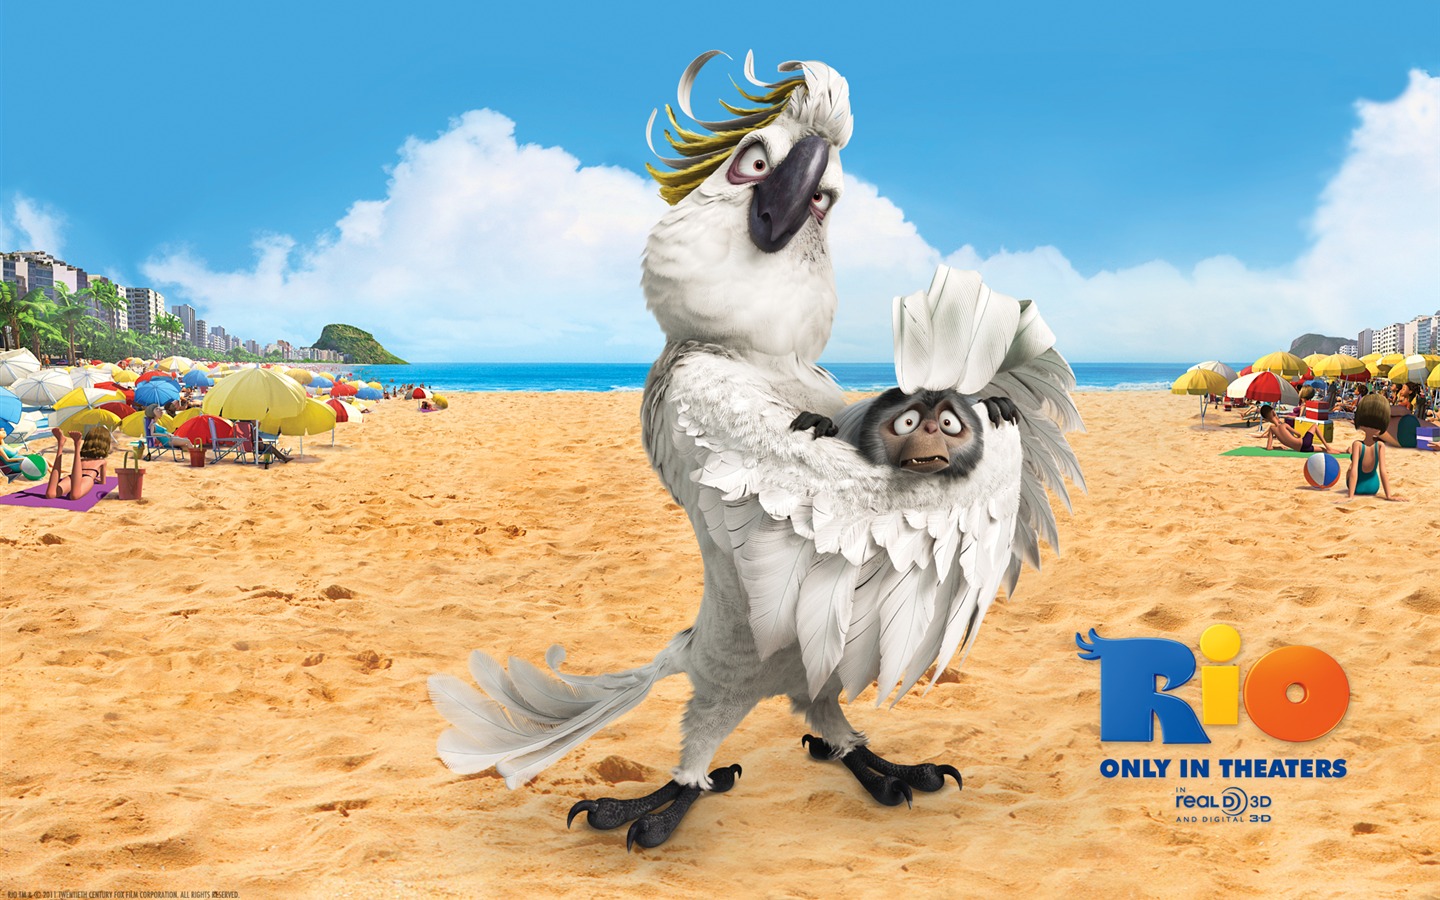 Rio 2011 wallpapers #12 - 1440x900